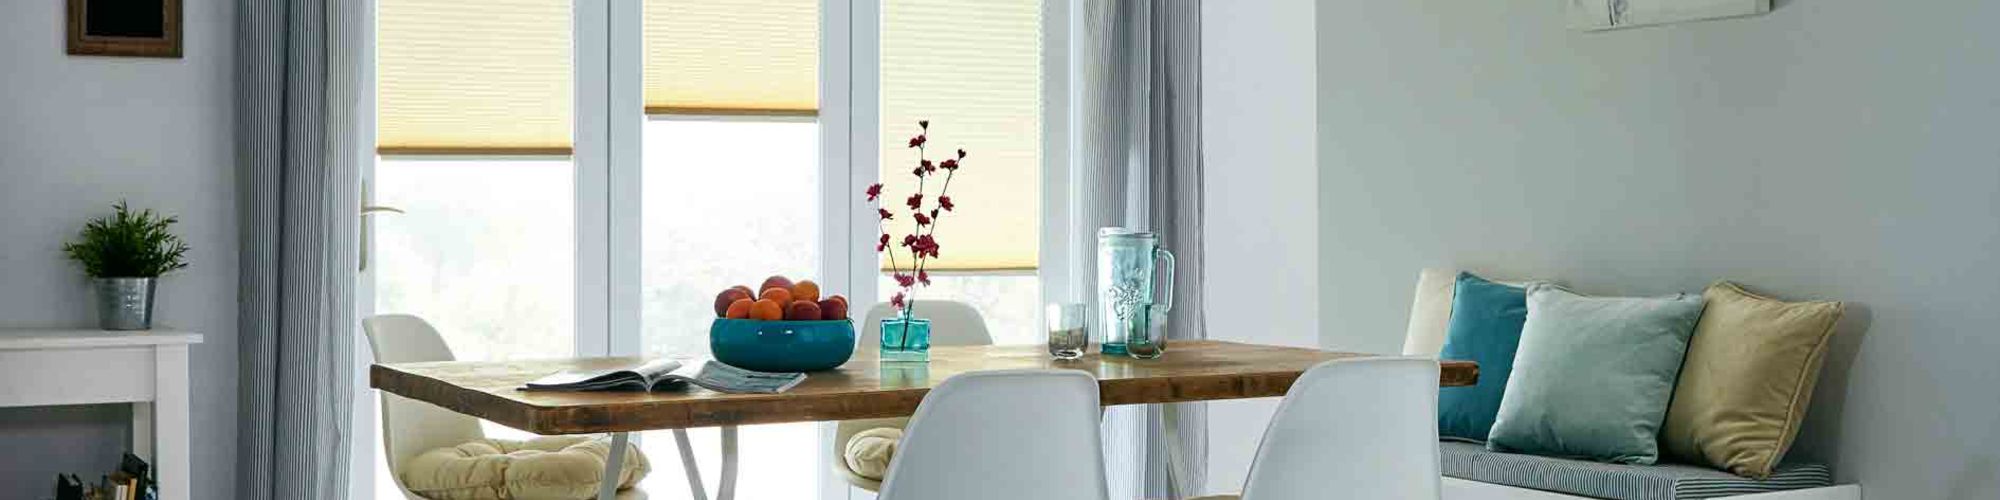 Baby Blue Perfect Fit Blinds from Blind Revolution.